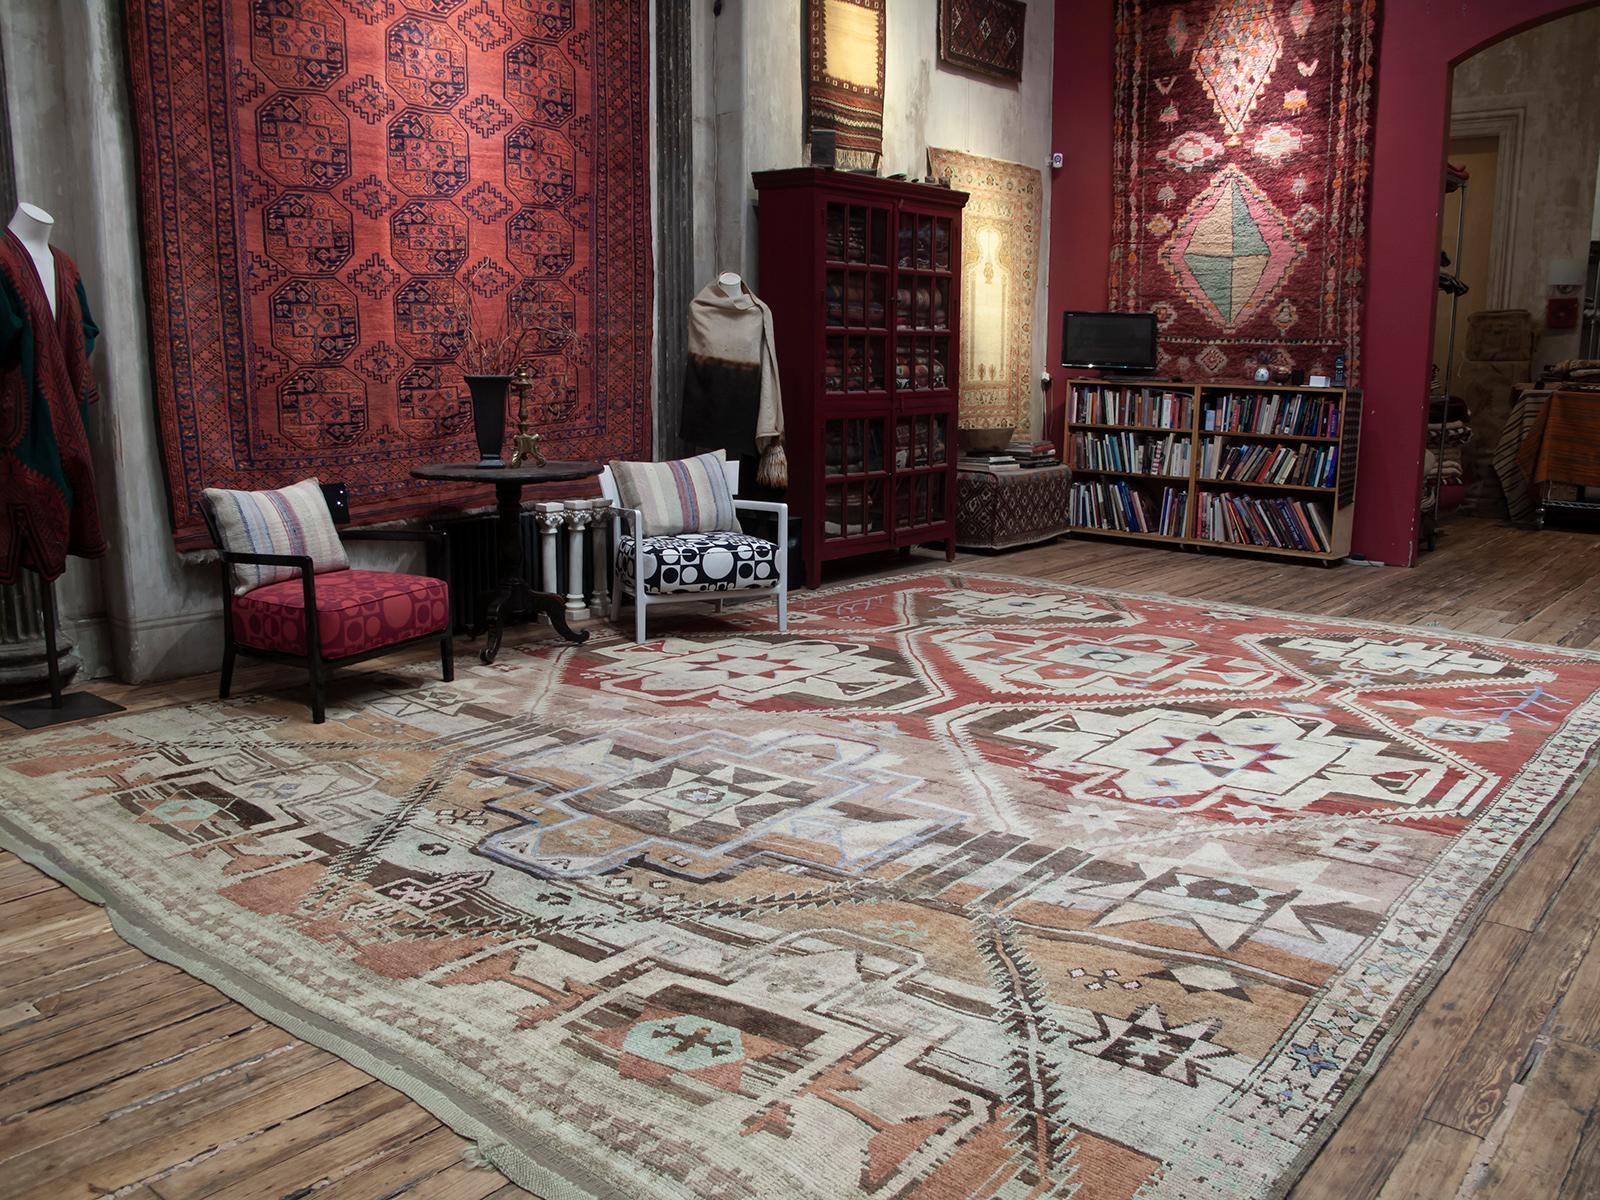 An unusually large tribal carpet from Northeast Turkey, on the border with the Caucasian region. The large scale star or shield design is familiar from Kurdish and Caucasian carpets and is rendered in a whimsical manner we expect from tribal